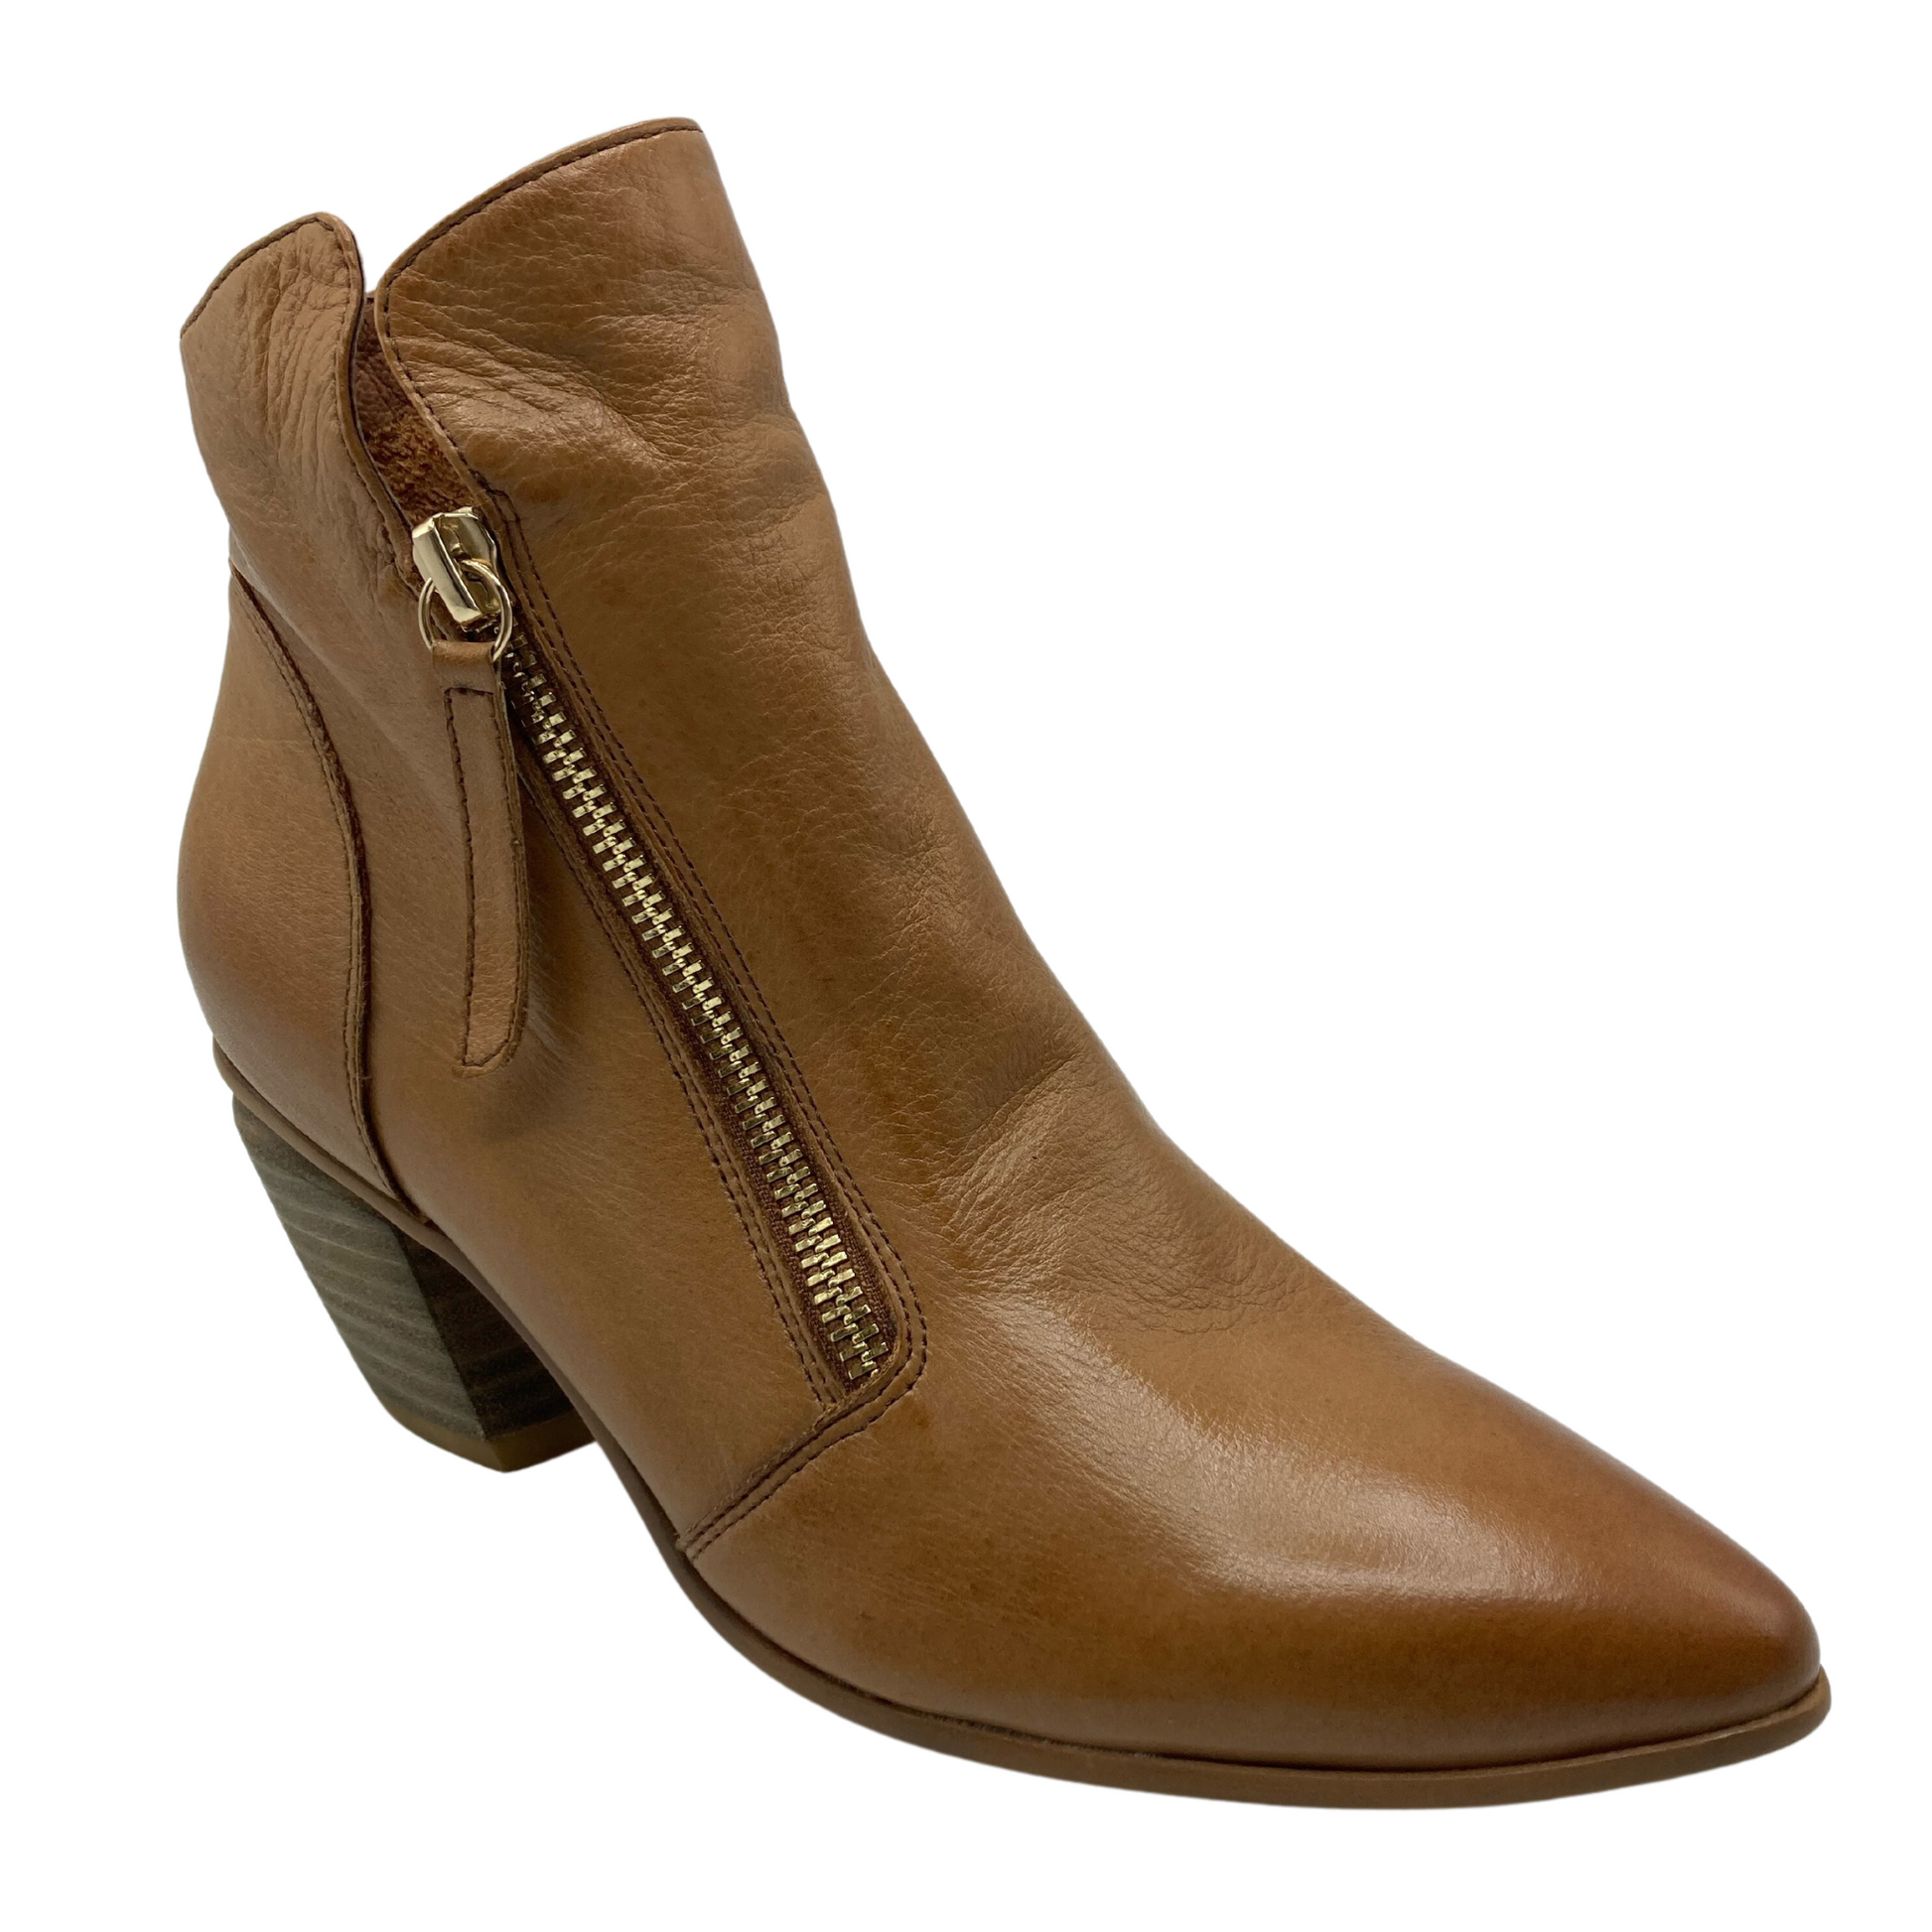 45 degree angled view of leather short boot with gold zipper detail and pointed toe